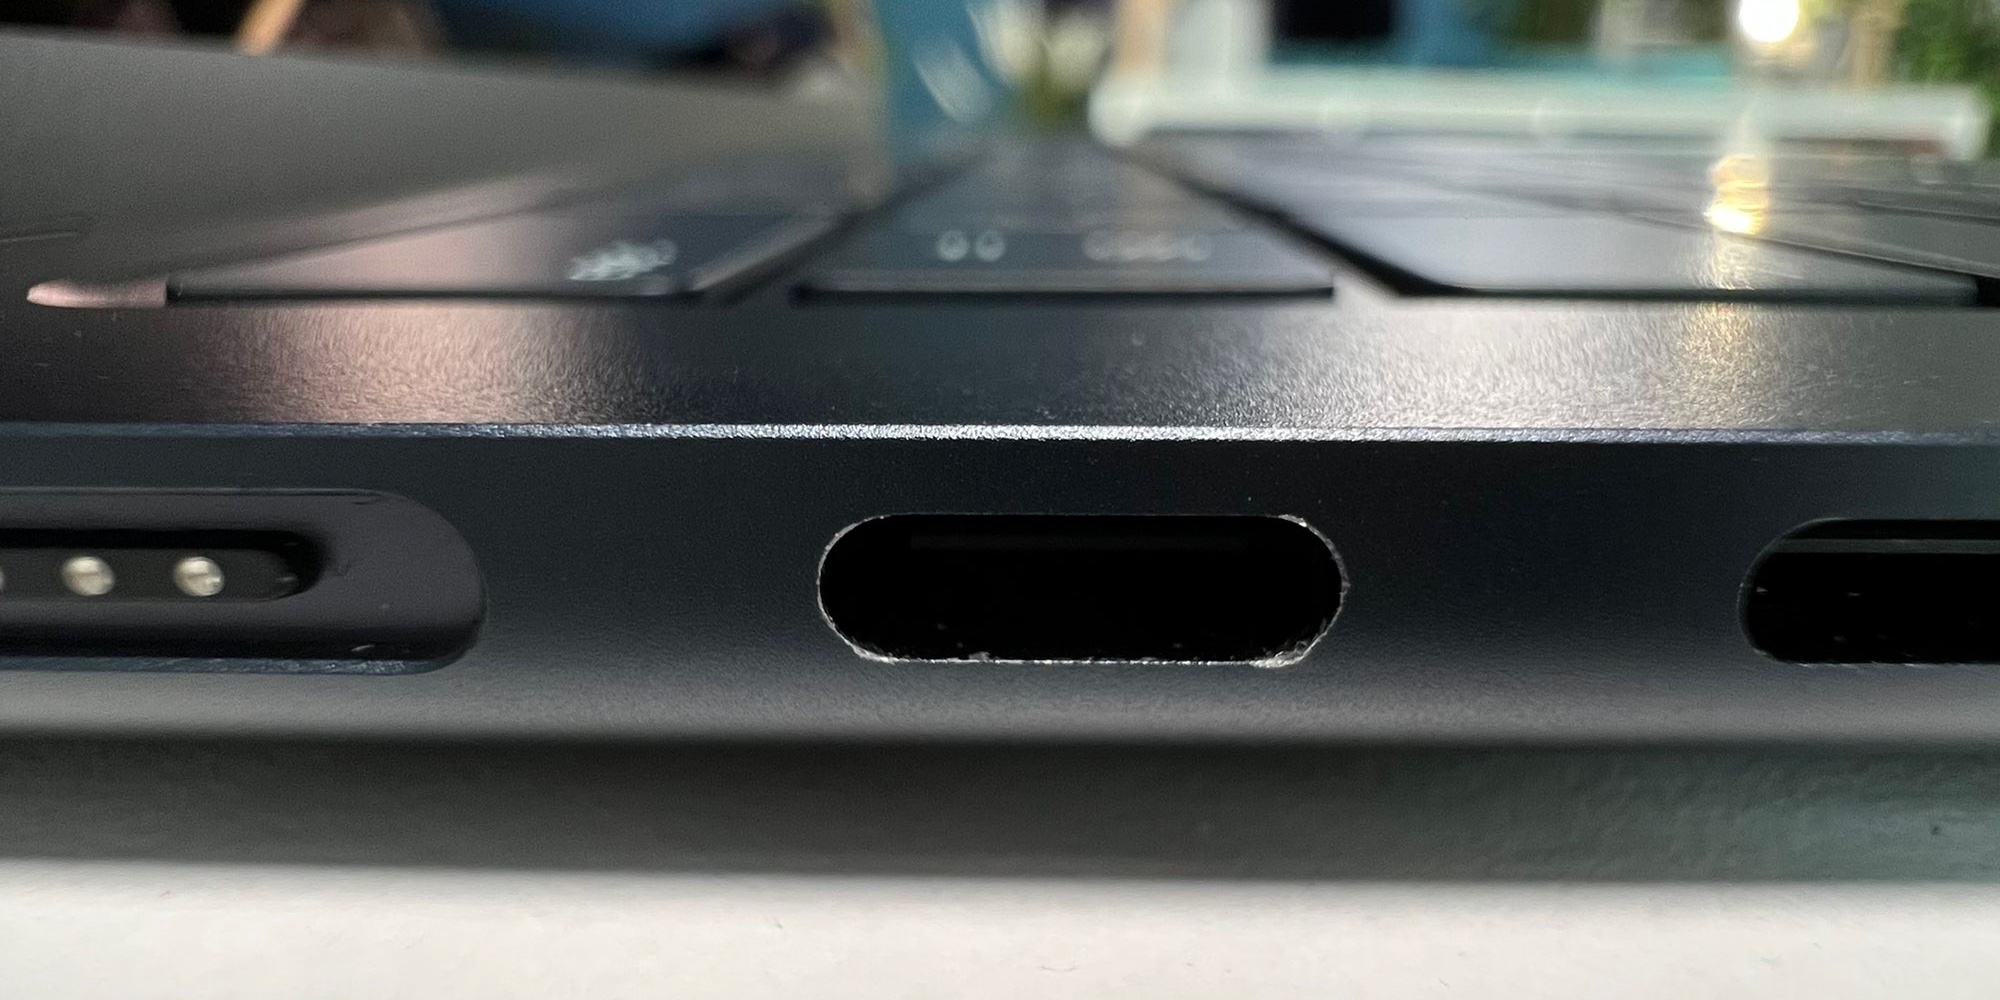 M2 MacBook Air: Has your 'midnight' finish scuffed yet? - 9to5Mac